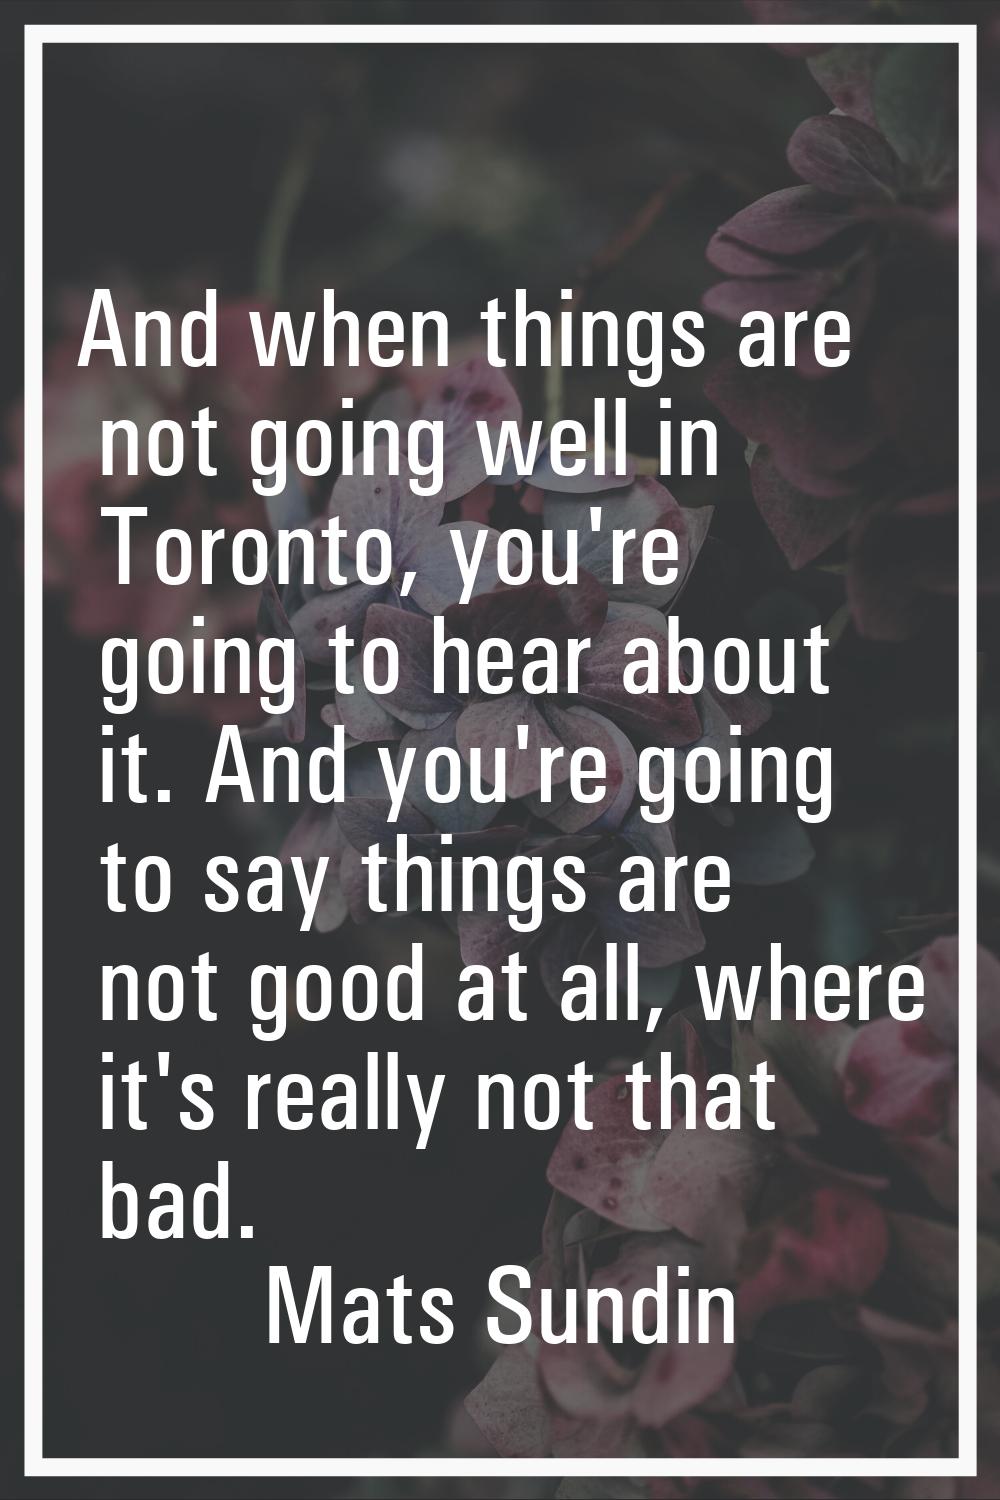 And when things are not going well in Toronto, you're going to hear about it. And you're going to s